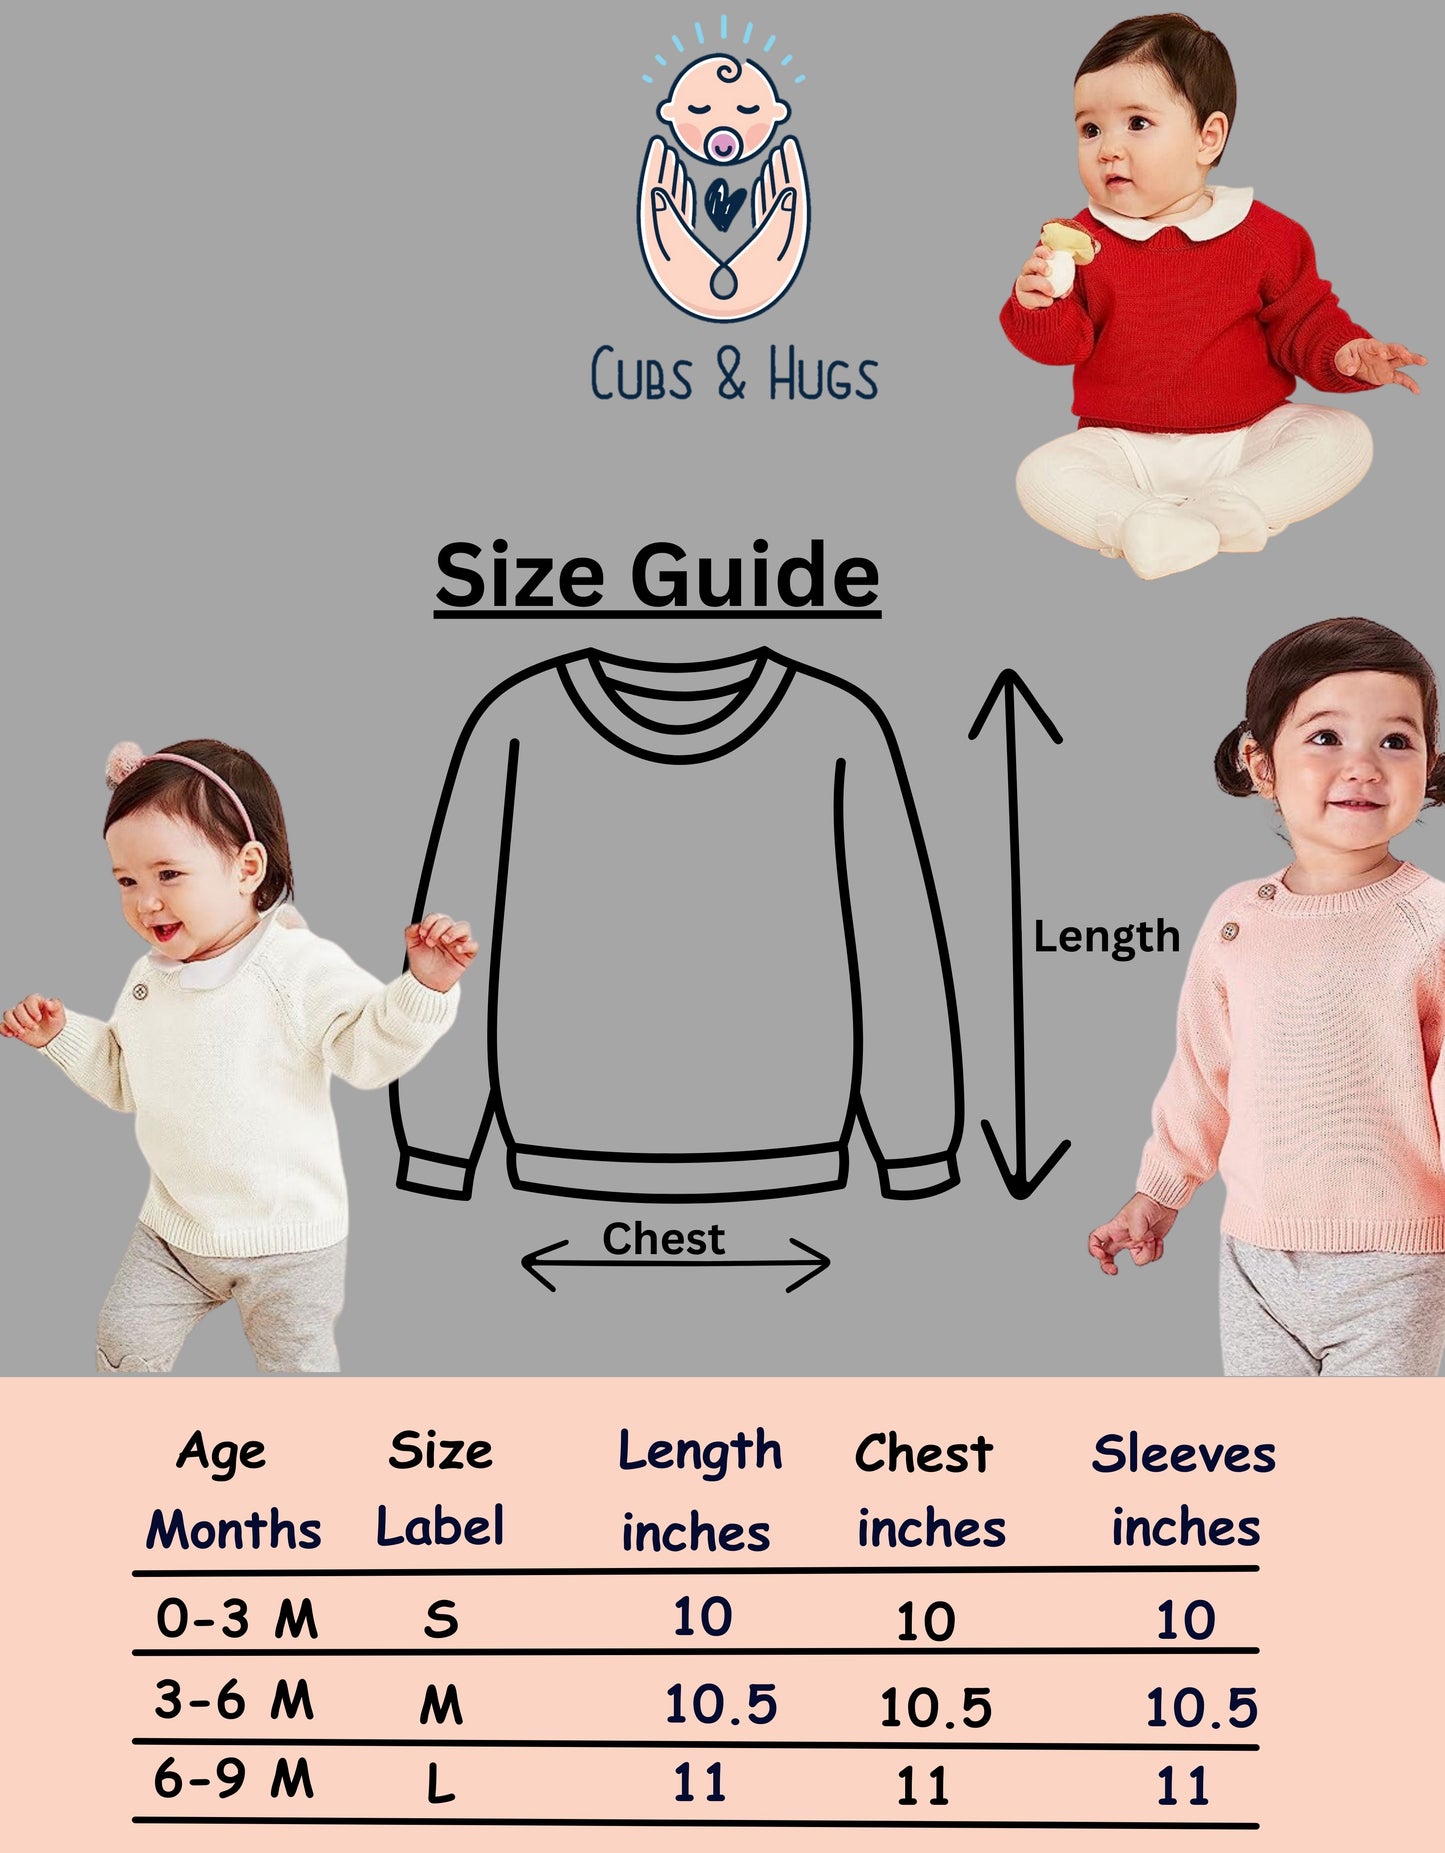 Full Sleeves Baby Woolen Sweater Pullover Cardigan- Pink